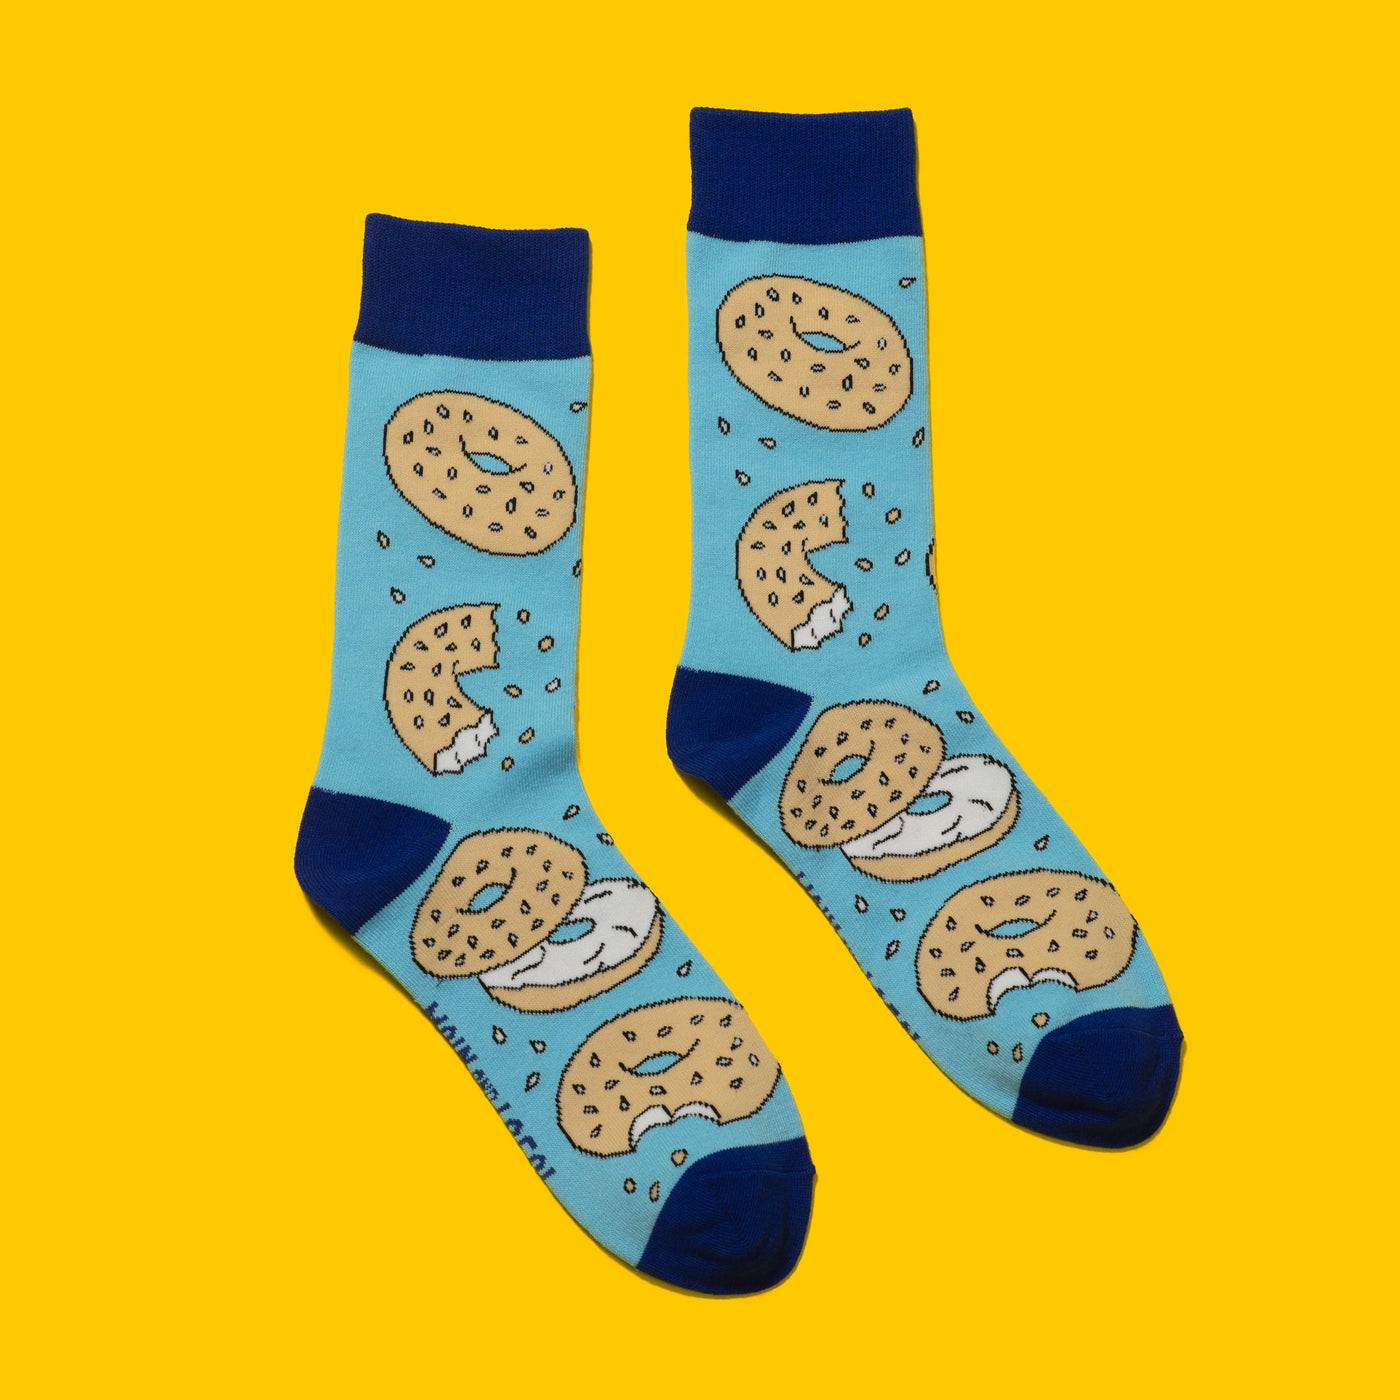 "Bagel" Cotton Crew Socks by Main & Local